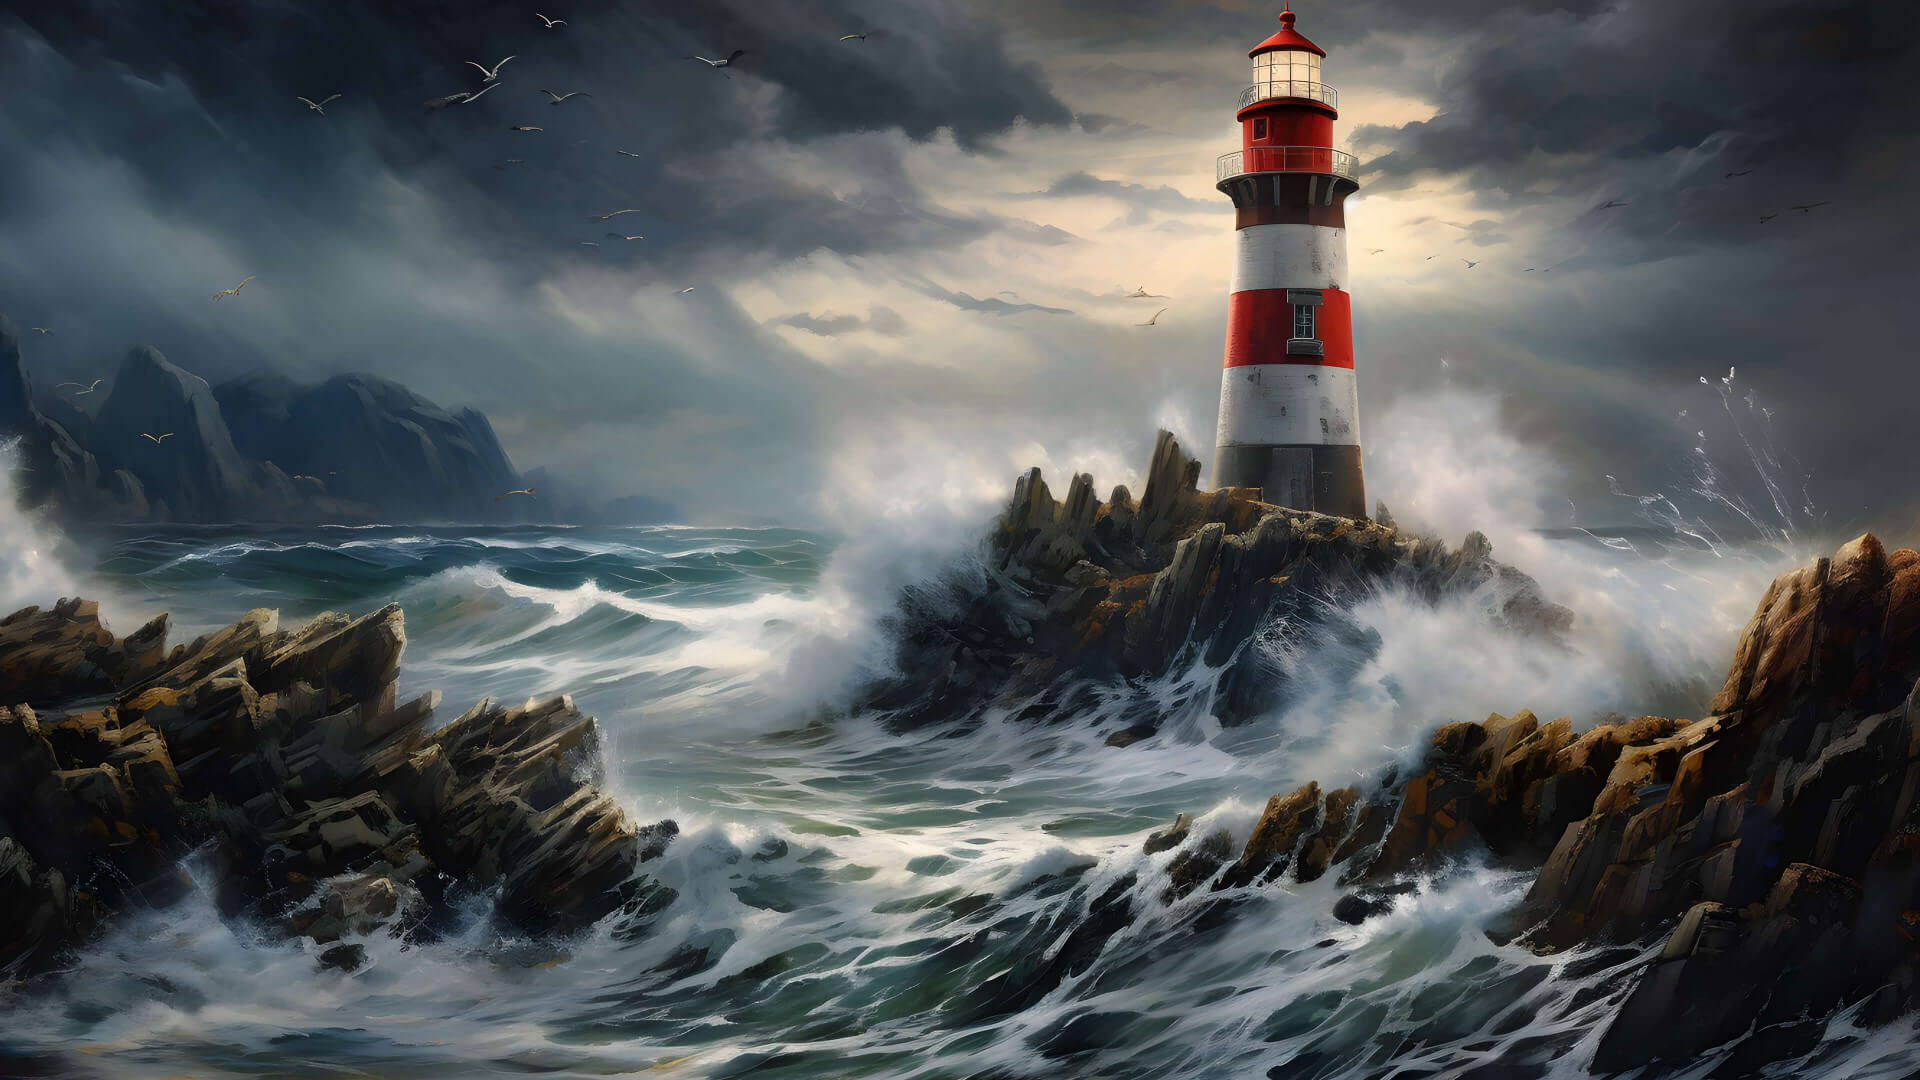 Lighthouse in the ocean waves wallpaper 1920x1080